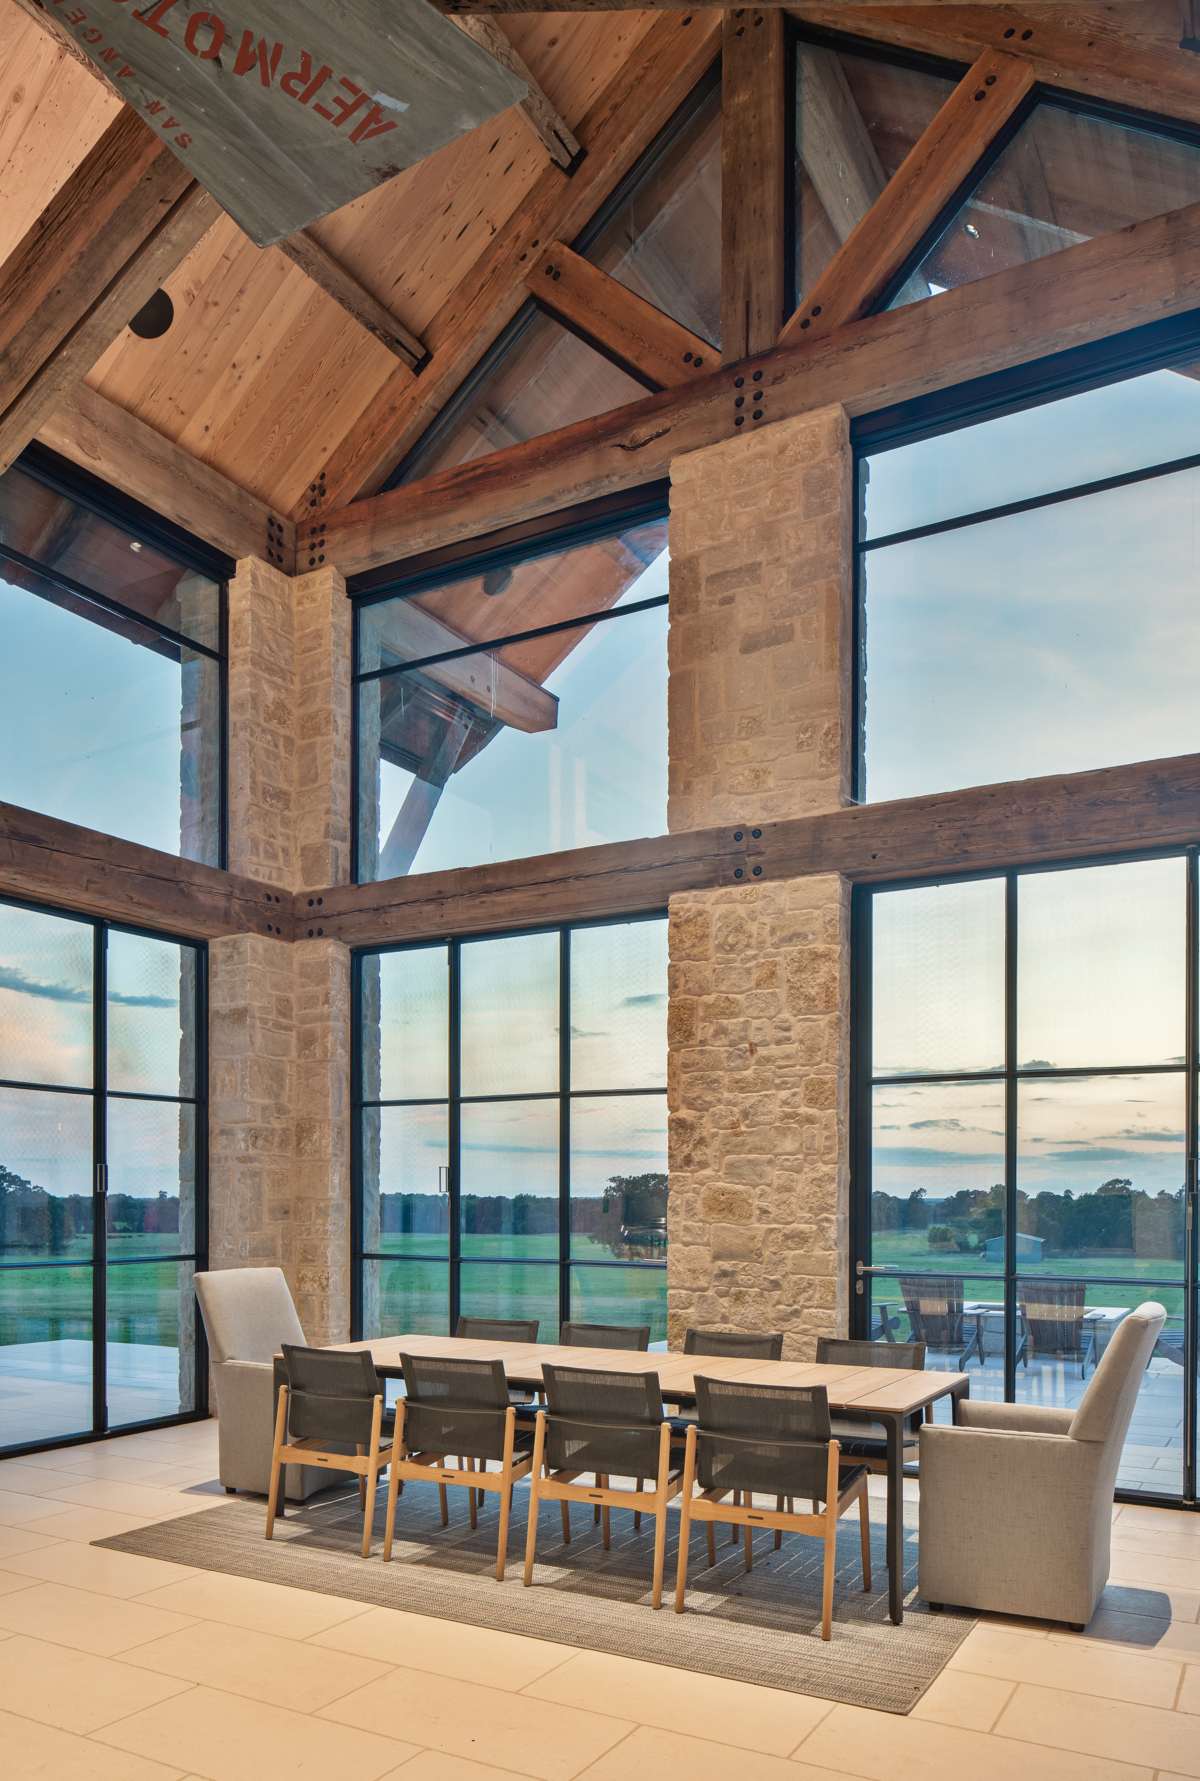 Interior view of the indoor-outdoor dining room at Texas Ranch, a custom home designed and built by Farmer Payne Architects.